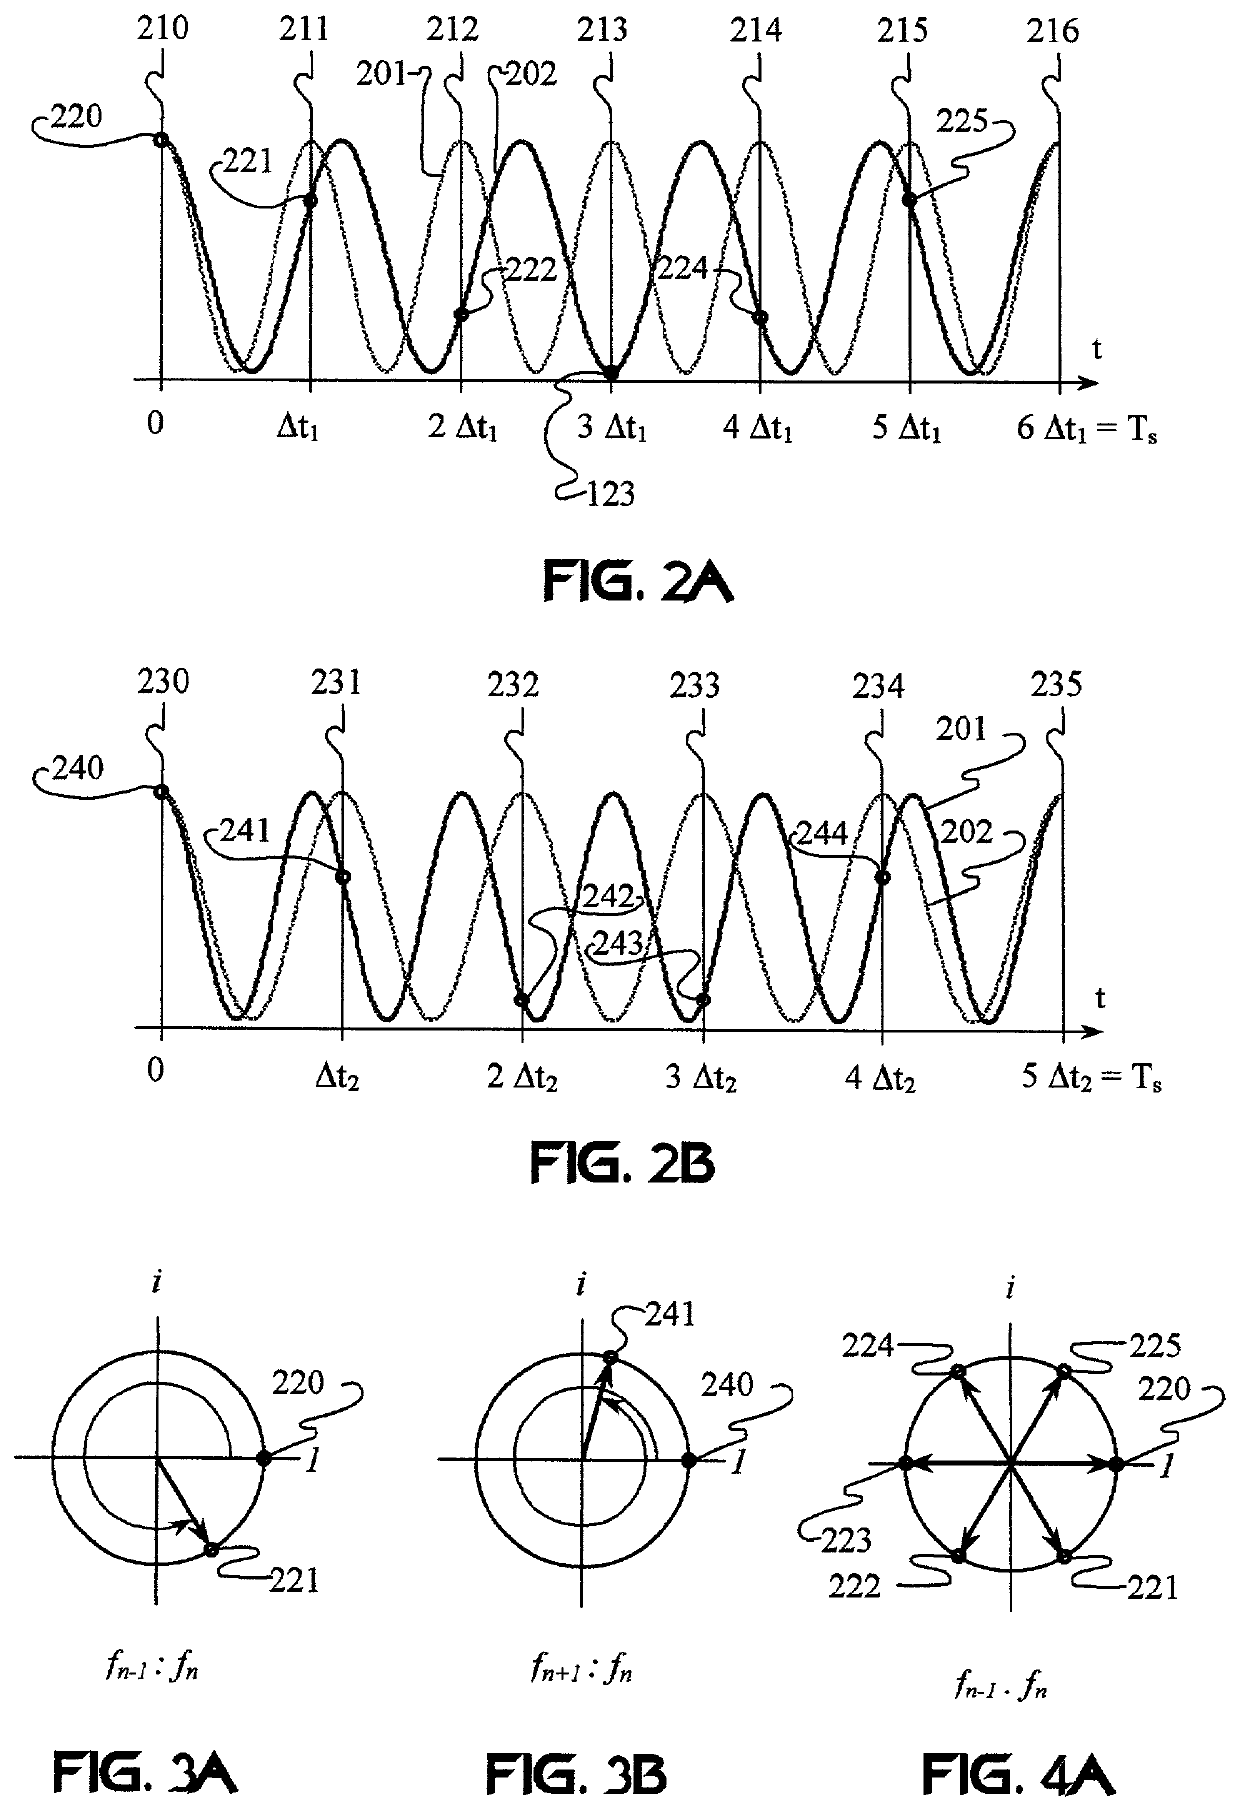 Single carrier frequency division multiple access baseband signal generation